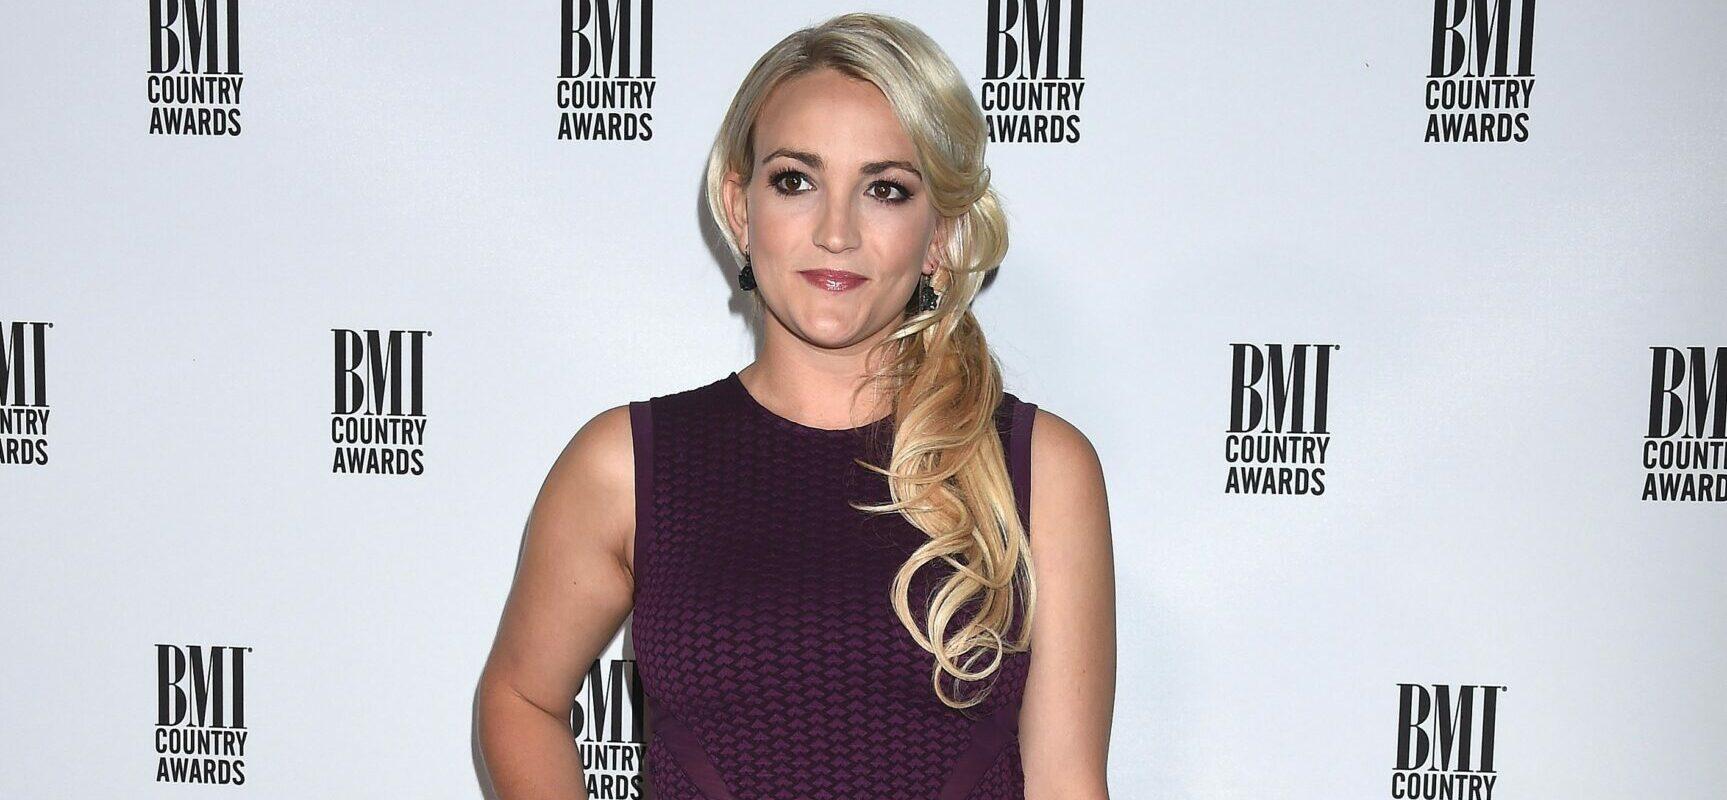 Jamie Lynn Spears To Join Original Cast On ‘Zoey 102,’ Austin Butler Will Not Be A Part Of The Reunion